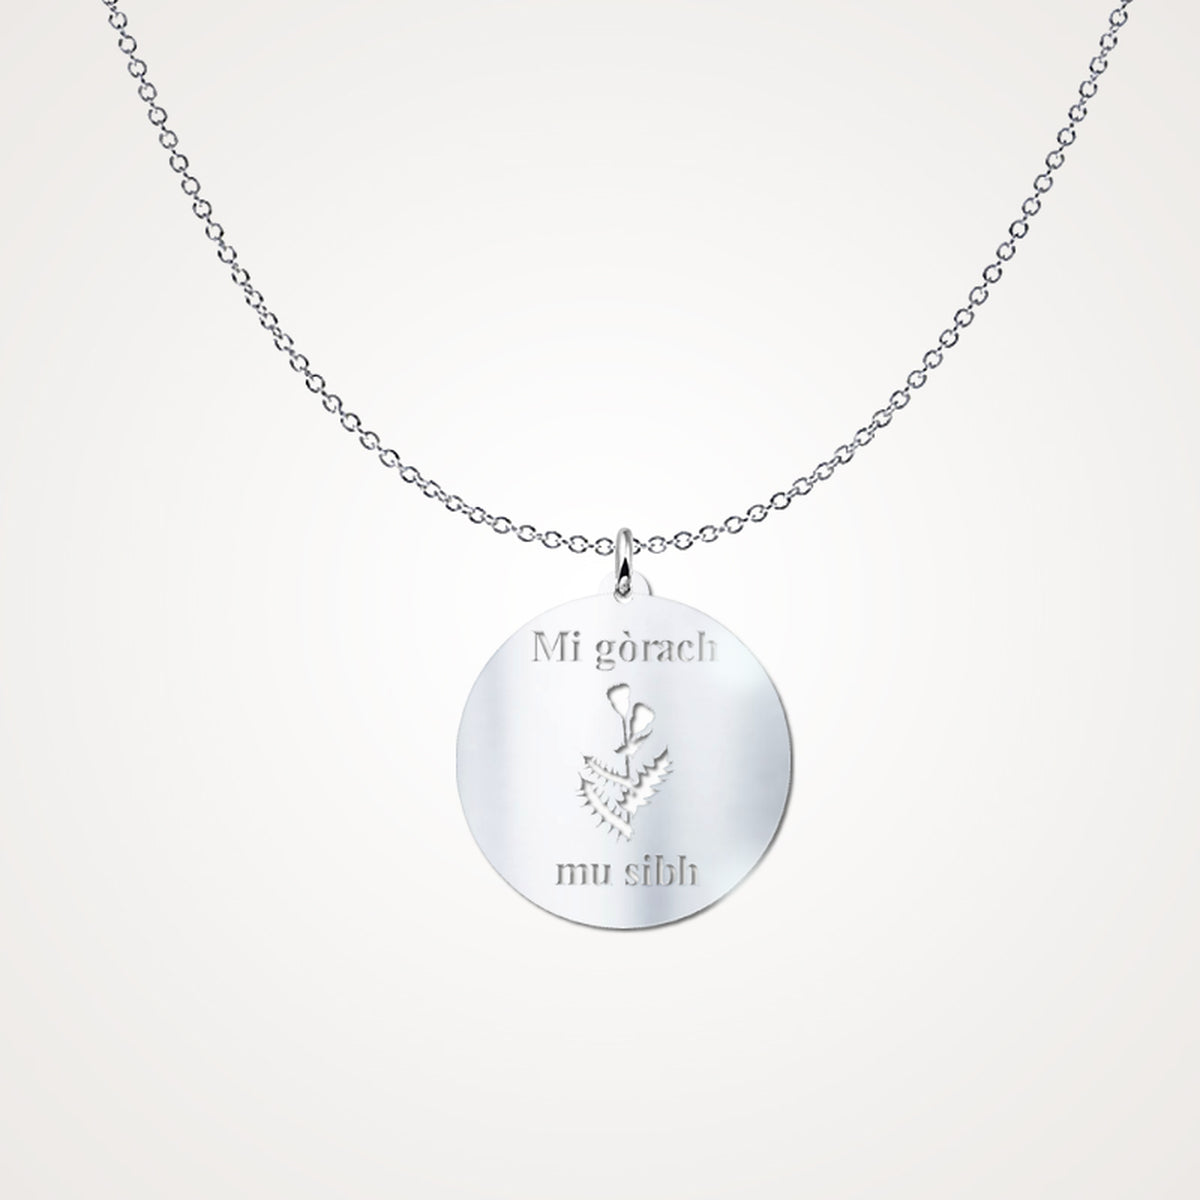 promise necklace for him and her